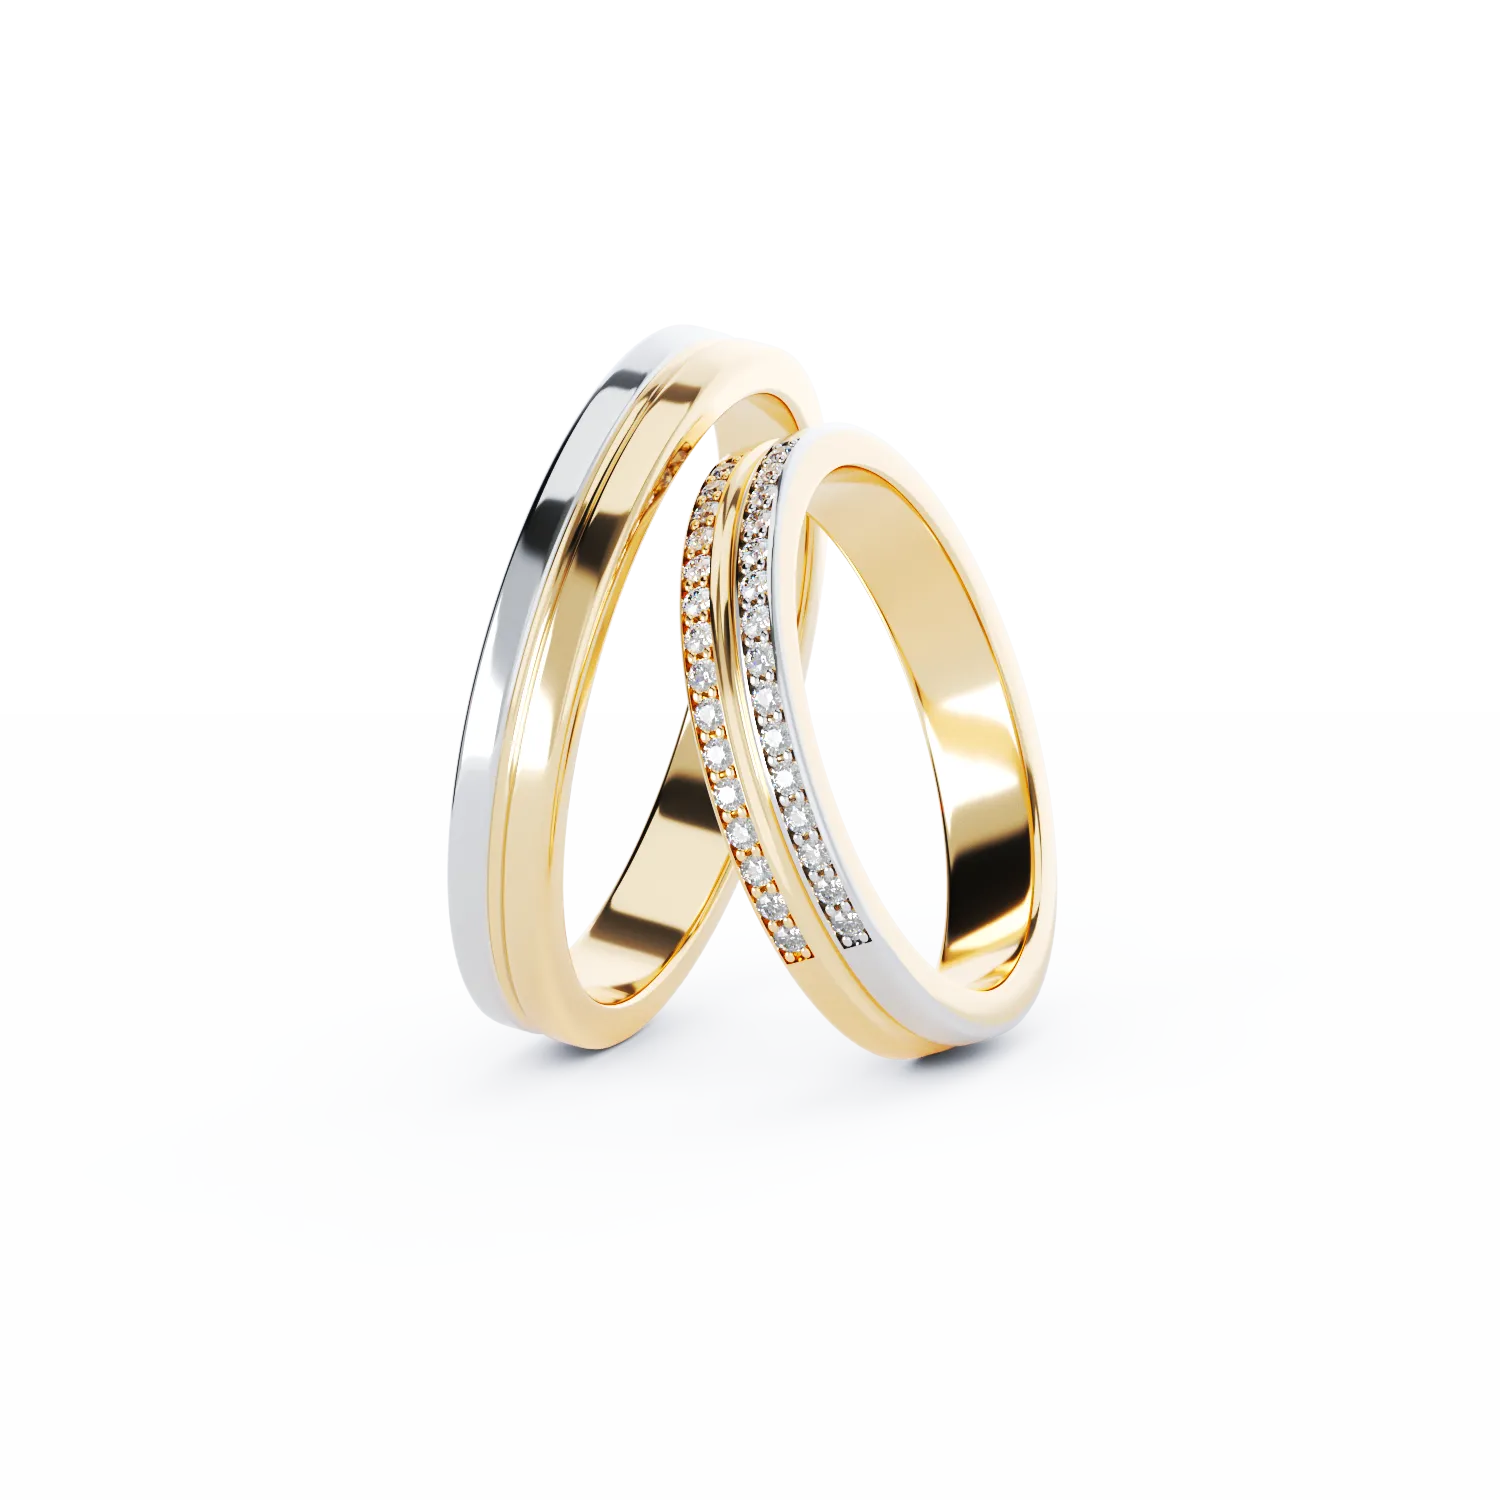 CLEA gold wedding rings